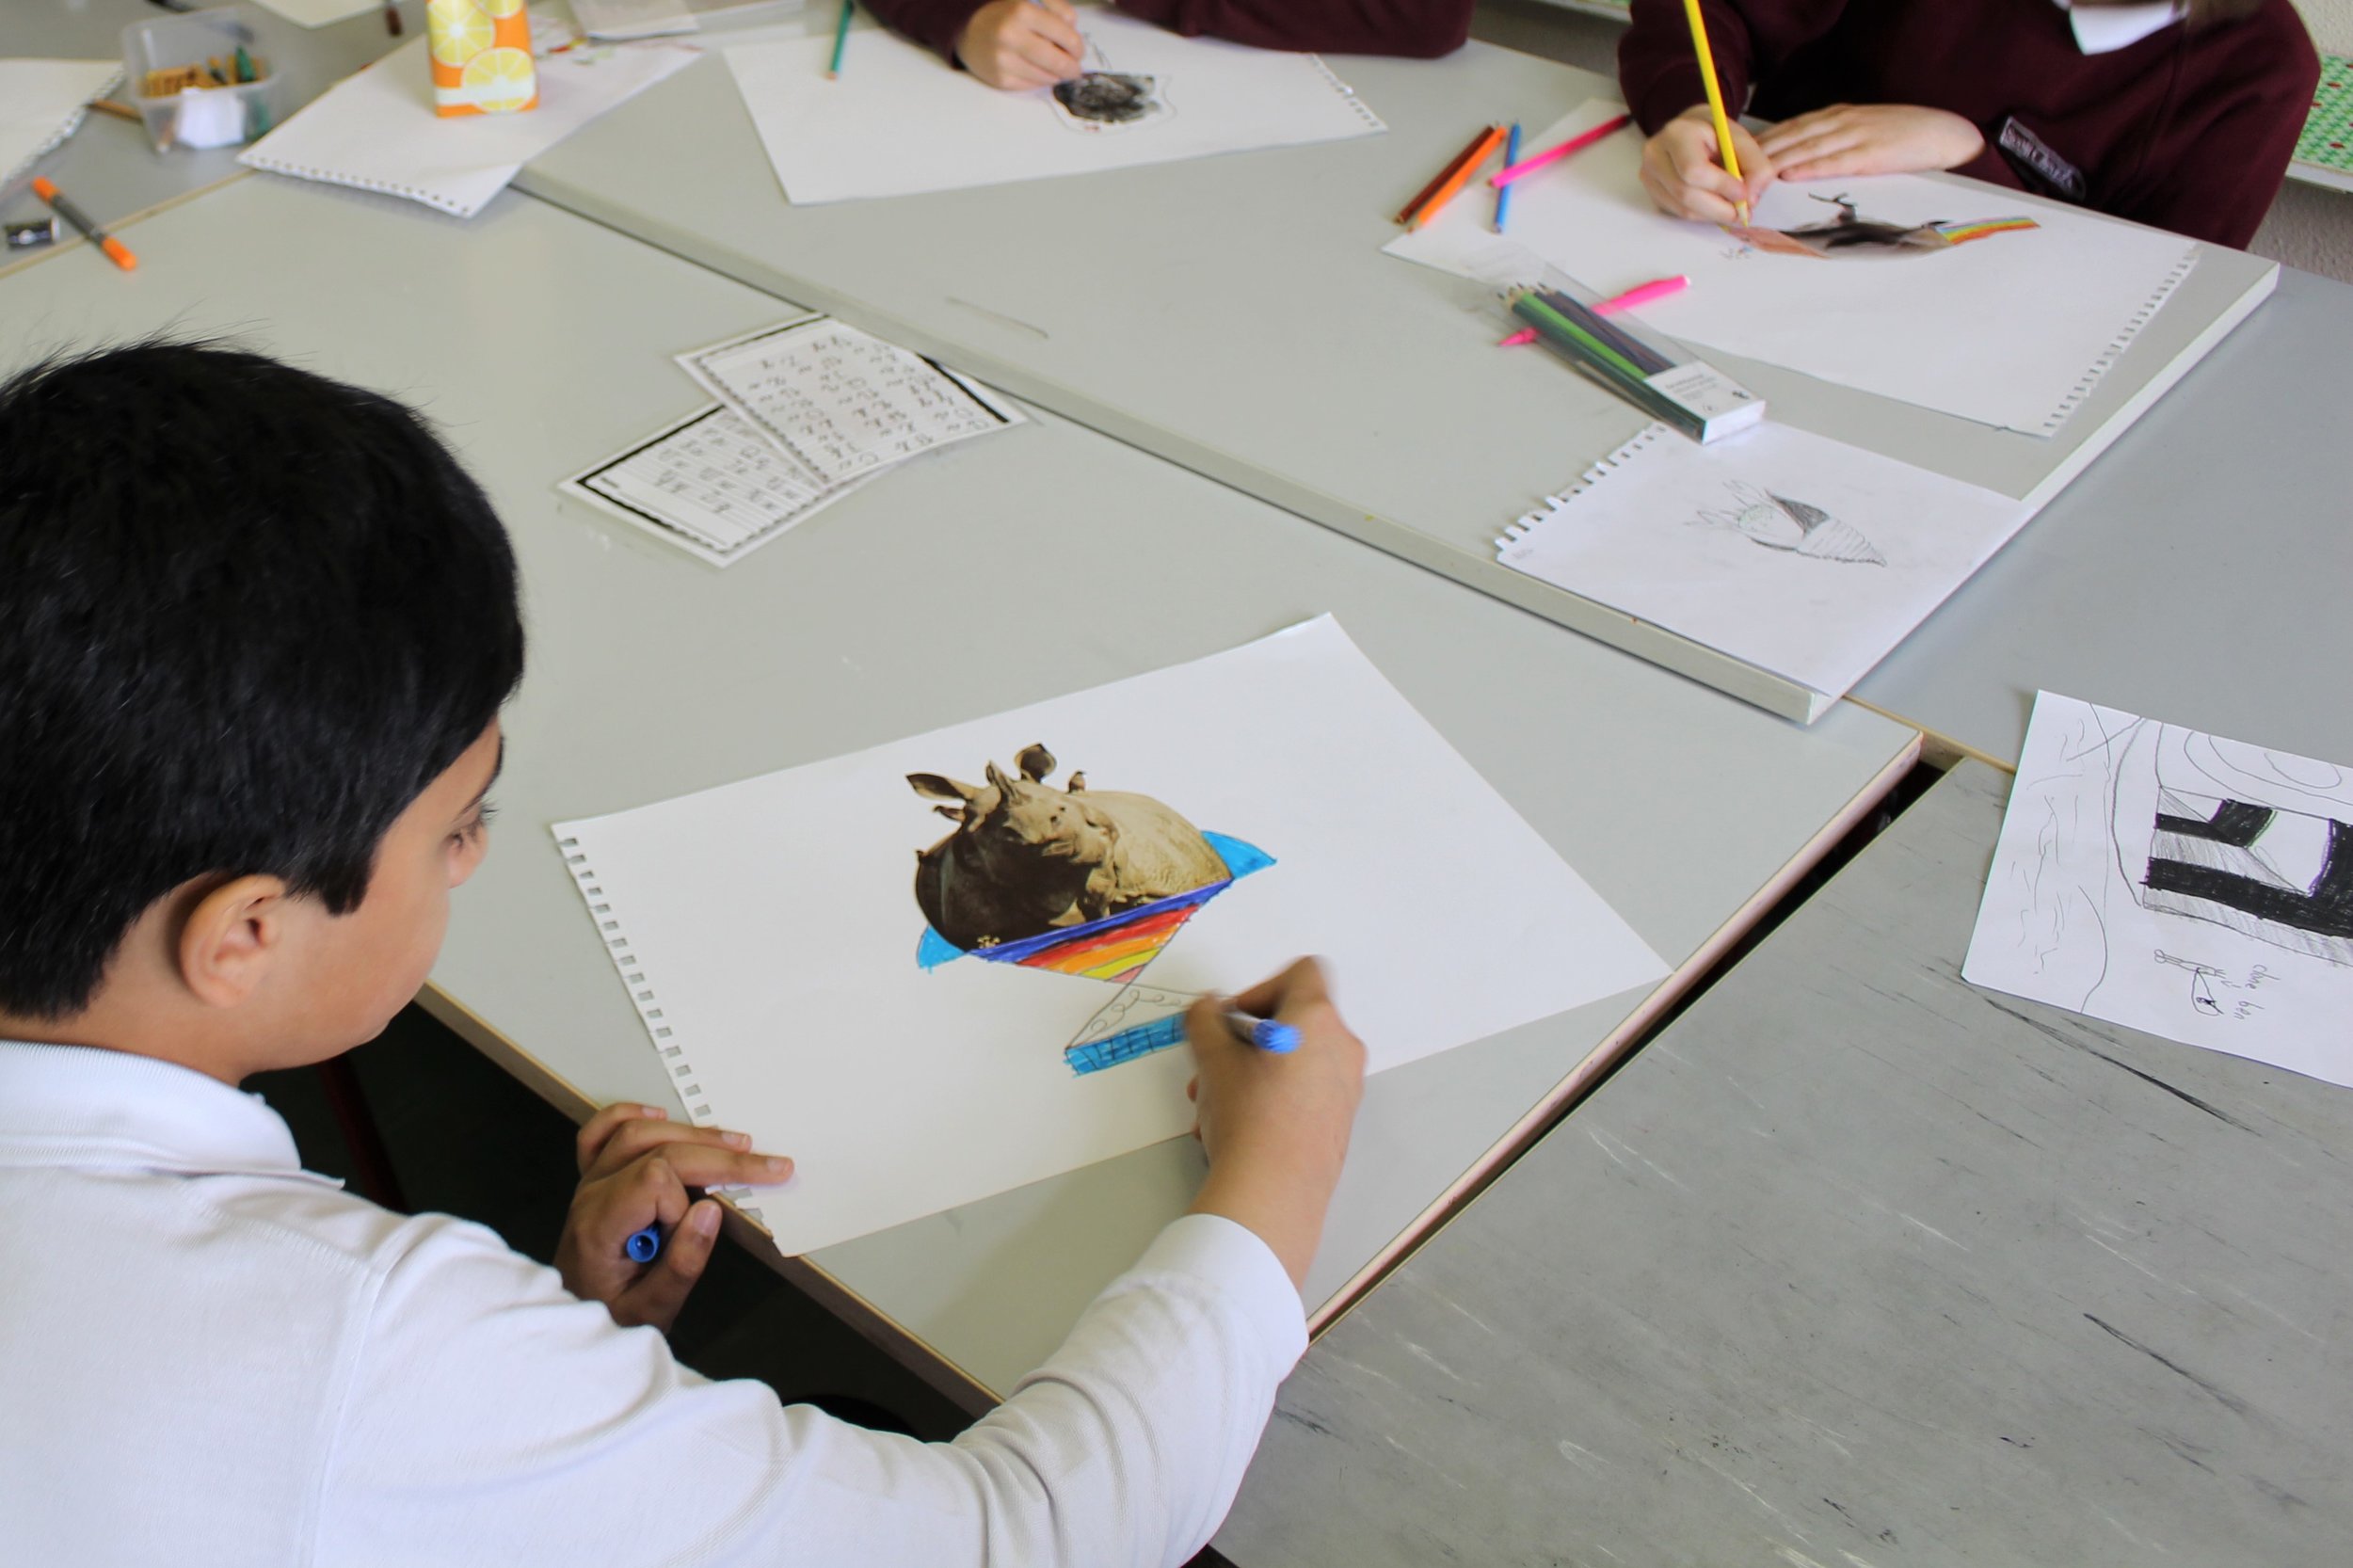  Siobhan gave each student a fragmented section of a cut out of an animal and asked each student to redesign the animal by incorporating elements from other animals and humans. 